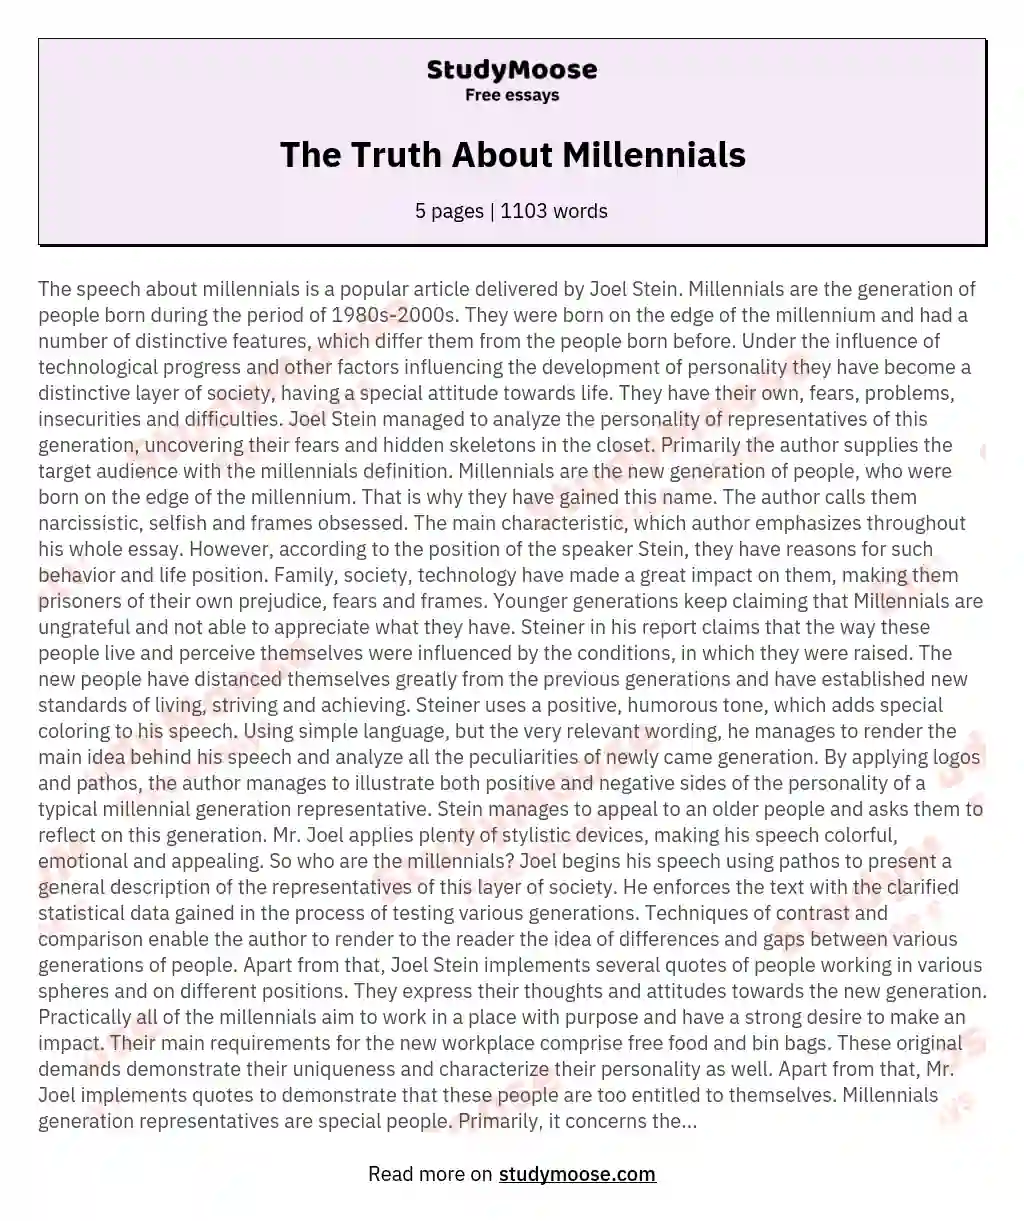 The Truth About Millennials essay